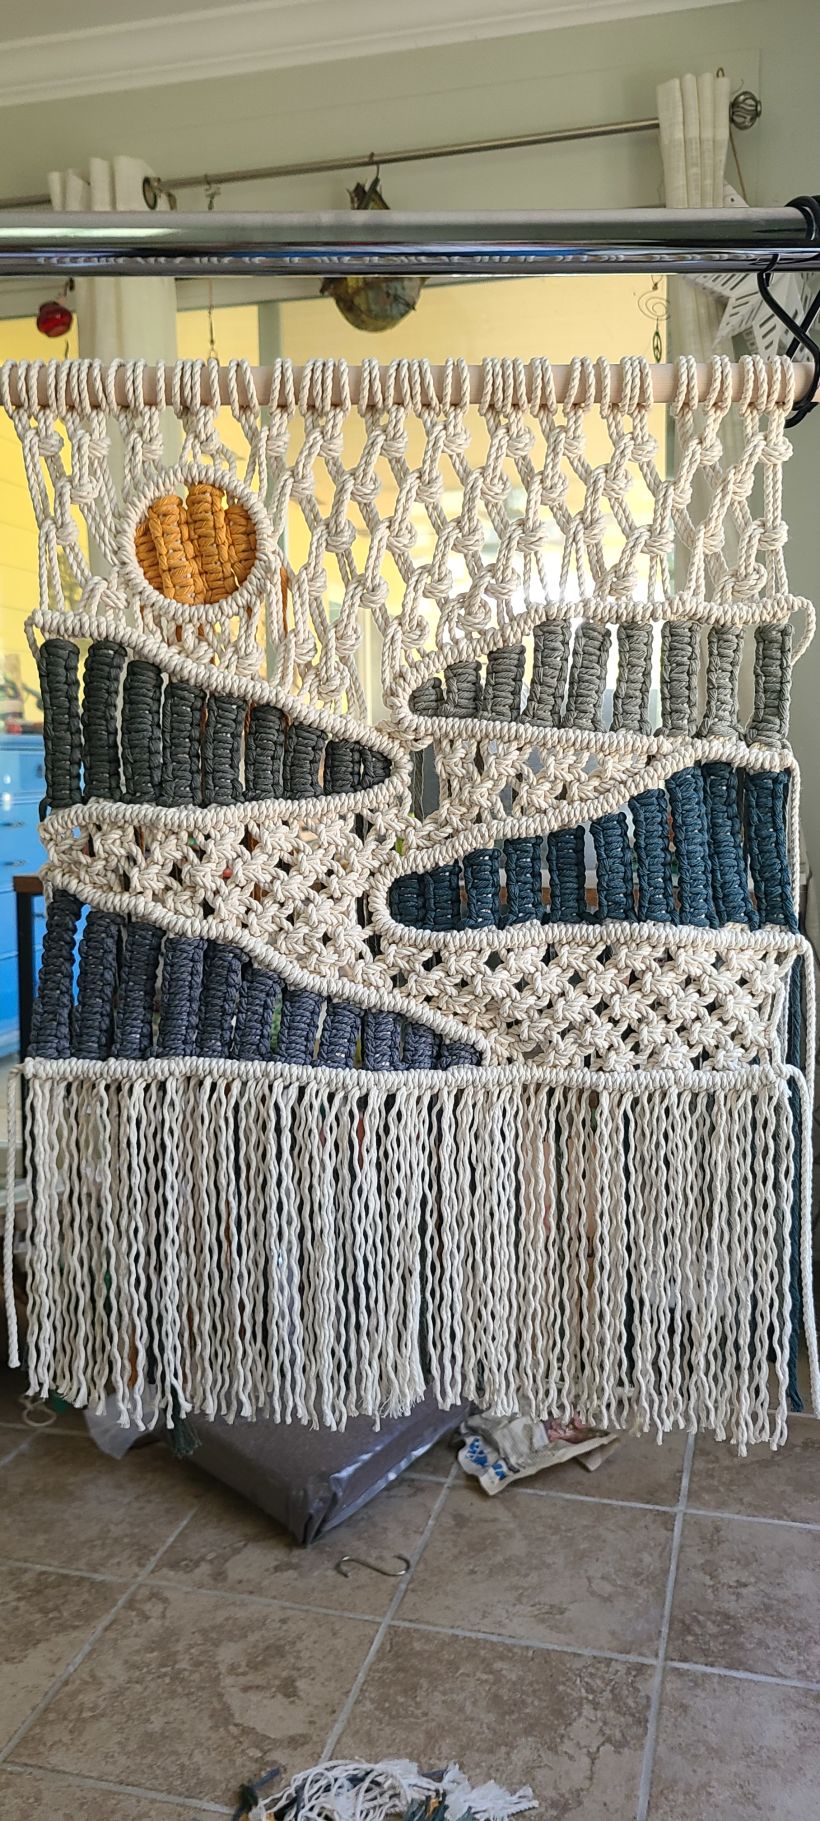 Free Course: Macrame Wall Hangings from